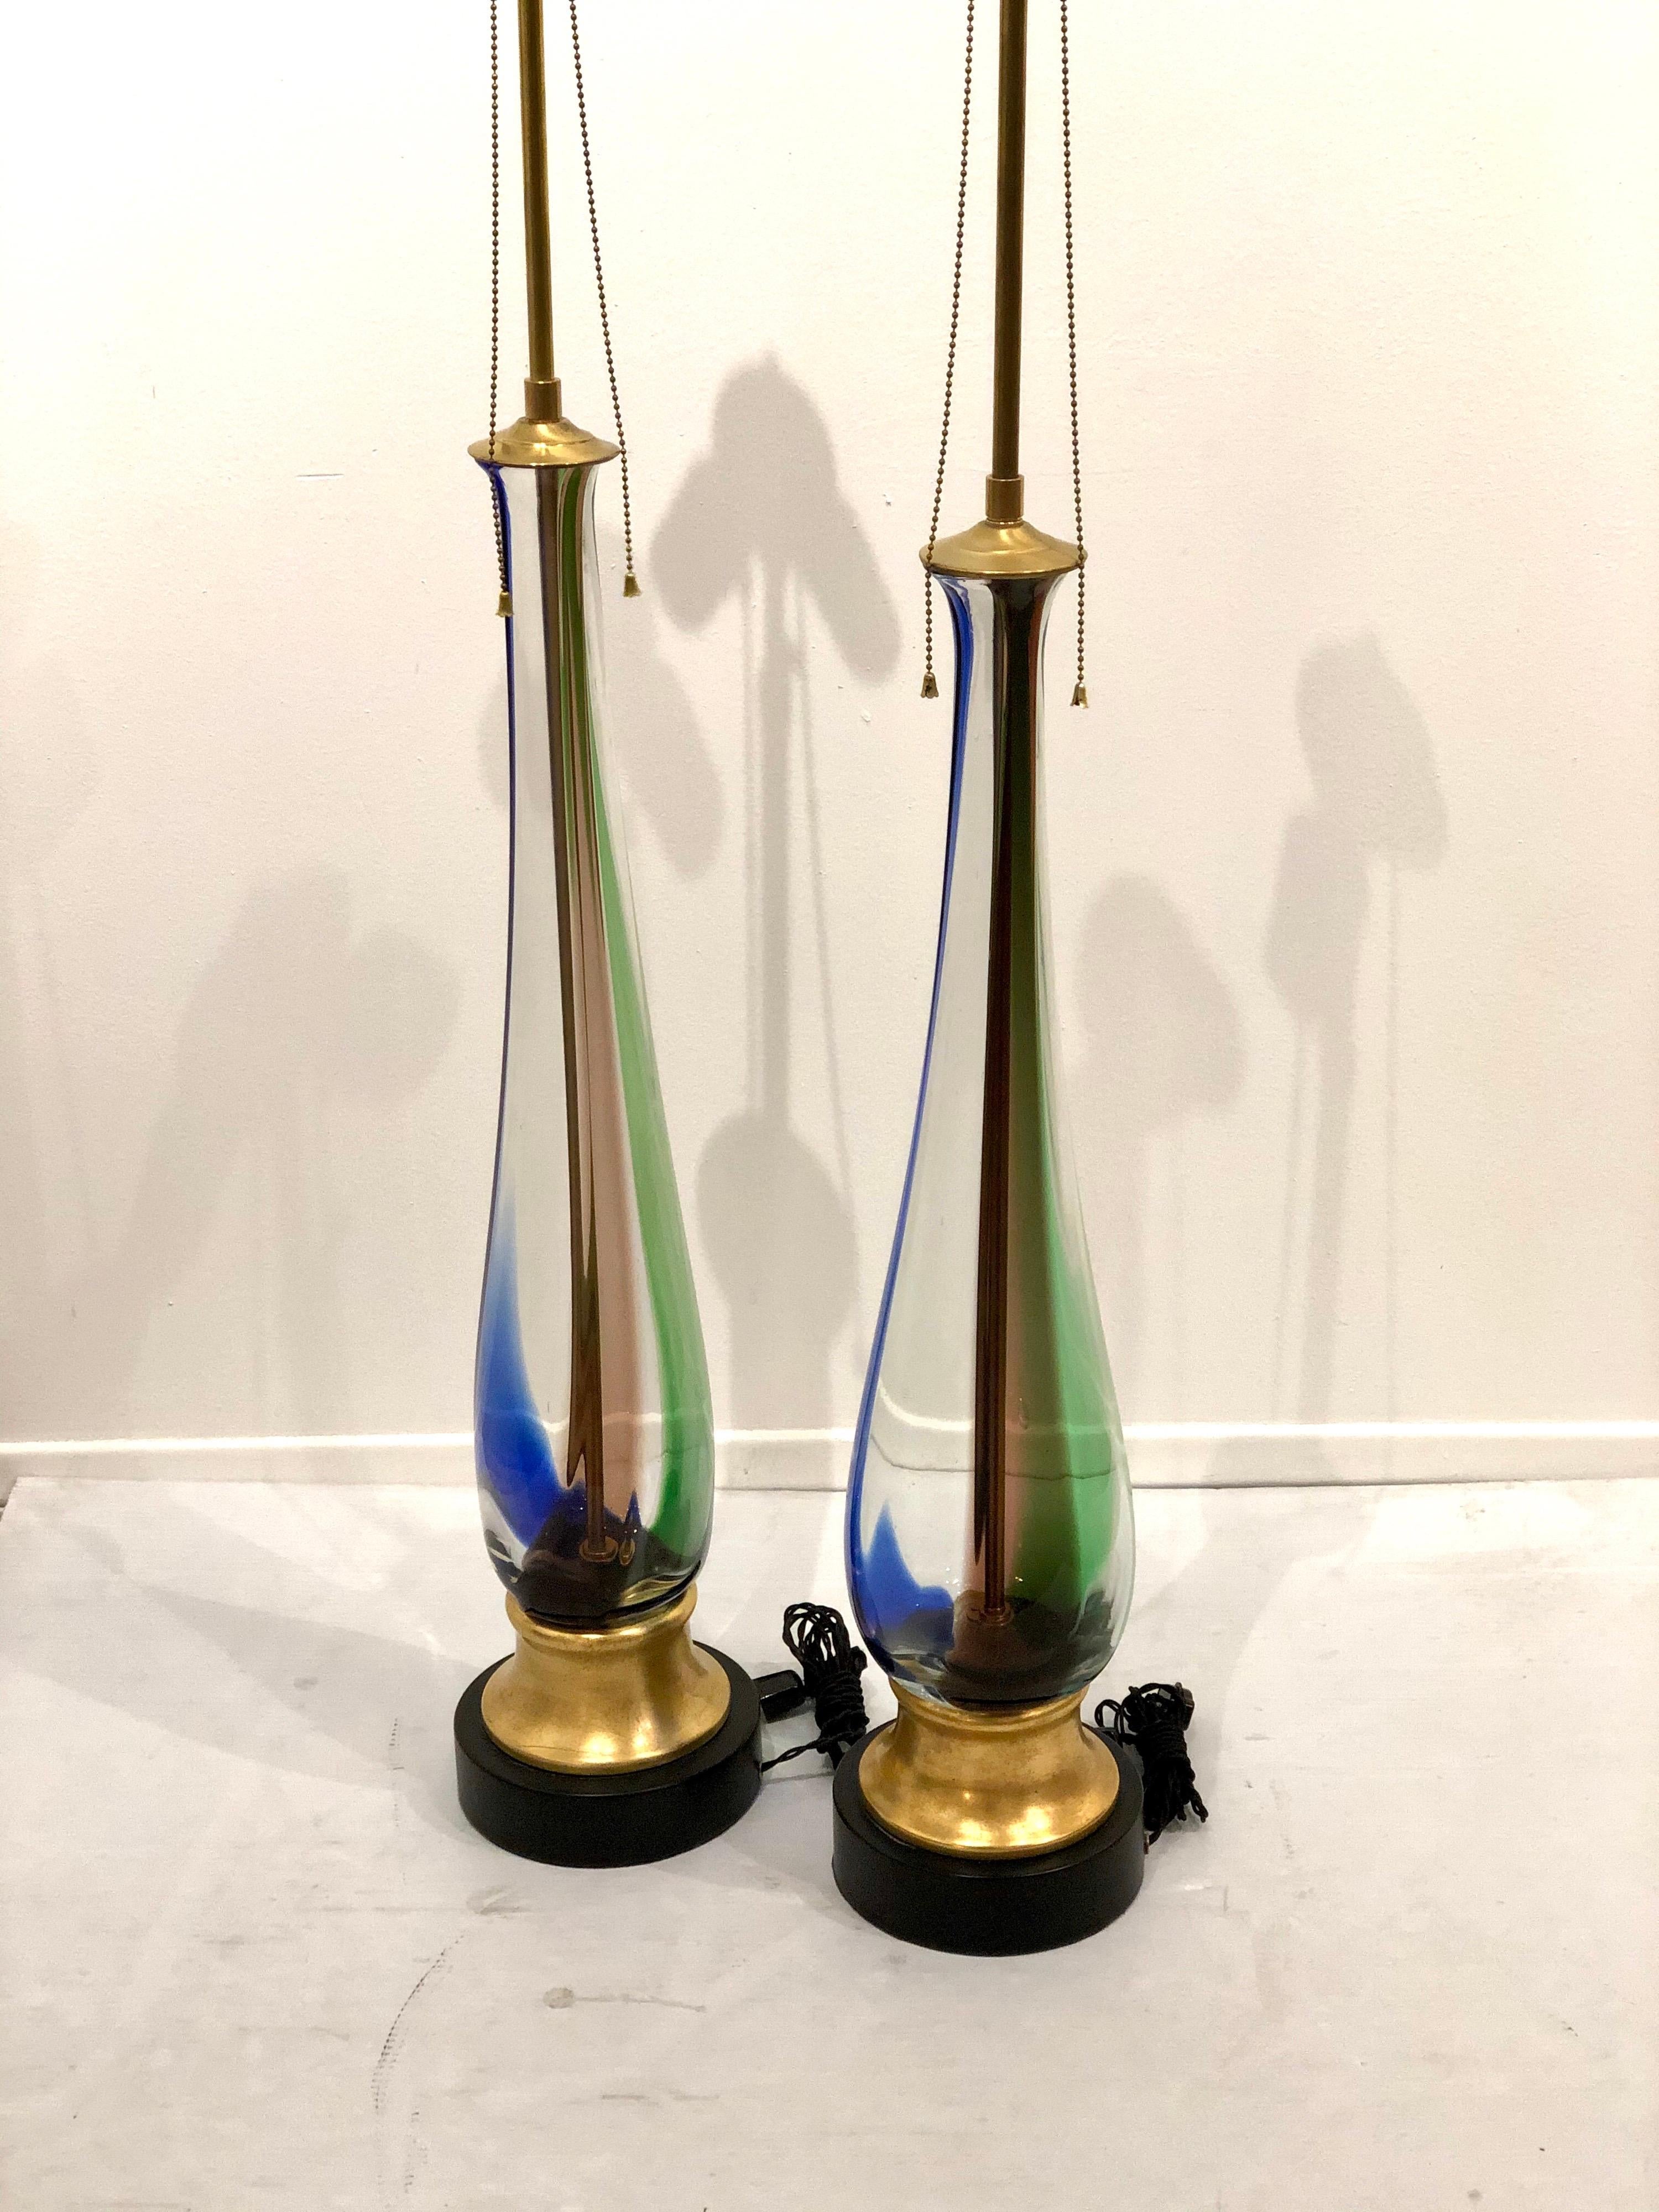 Beautiful impressive pair of table lamps by Murano, Venini freshly rewired gold leaf base double socket that adjust to desirable height, new cloth cord excellent condition lampshades not included. Beautiful colors.